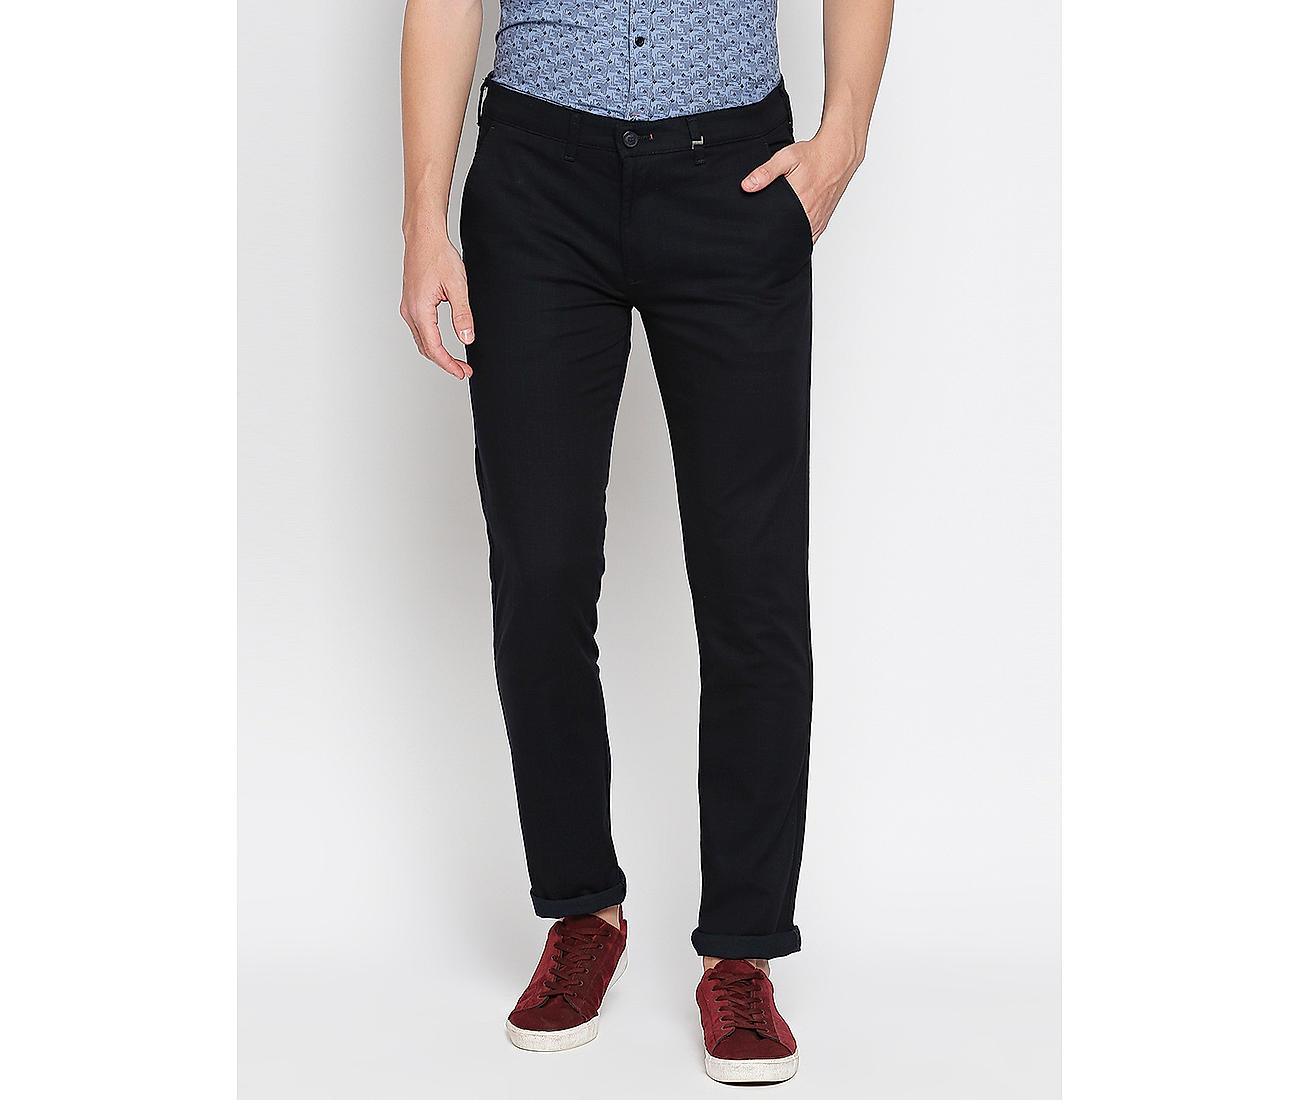 Buy Burgundy Trousers  Pants for Men by The Indian Garage Co Online   Ajiocom